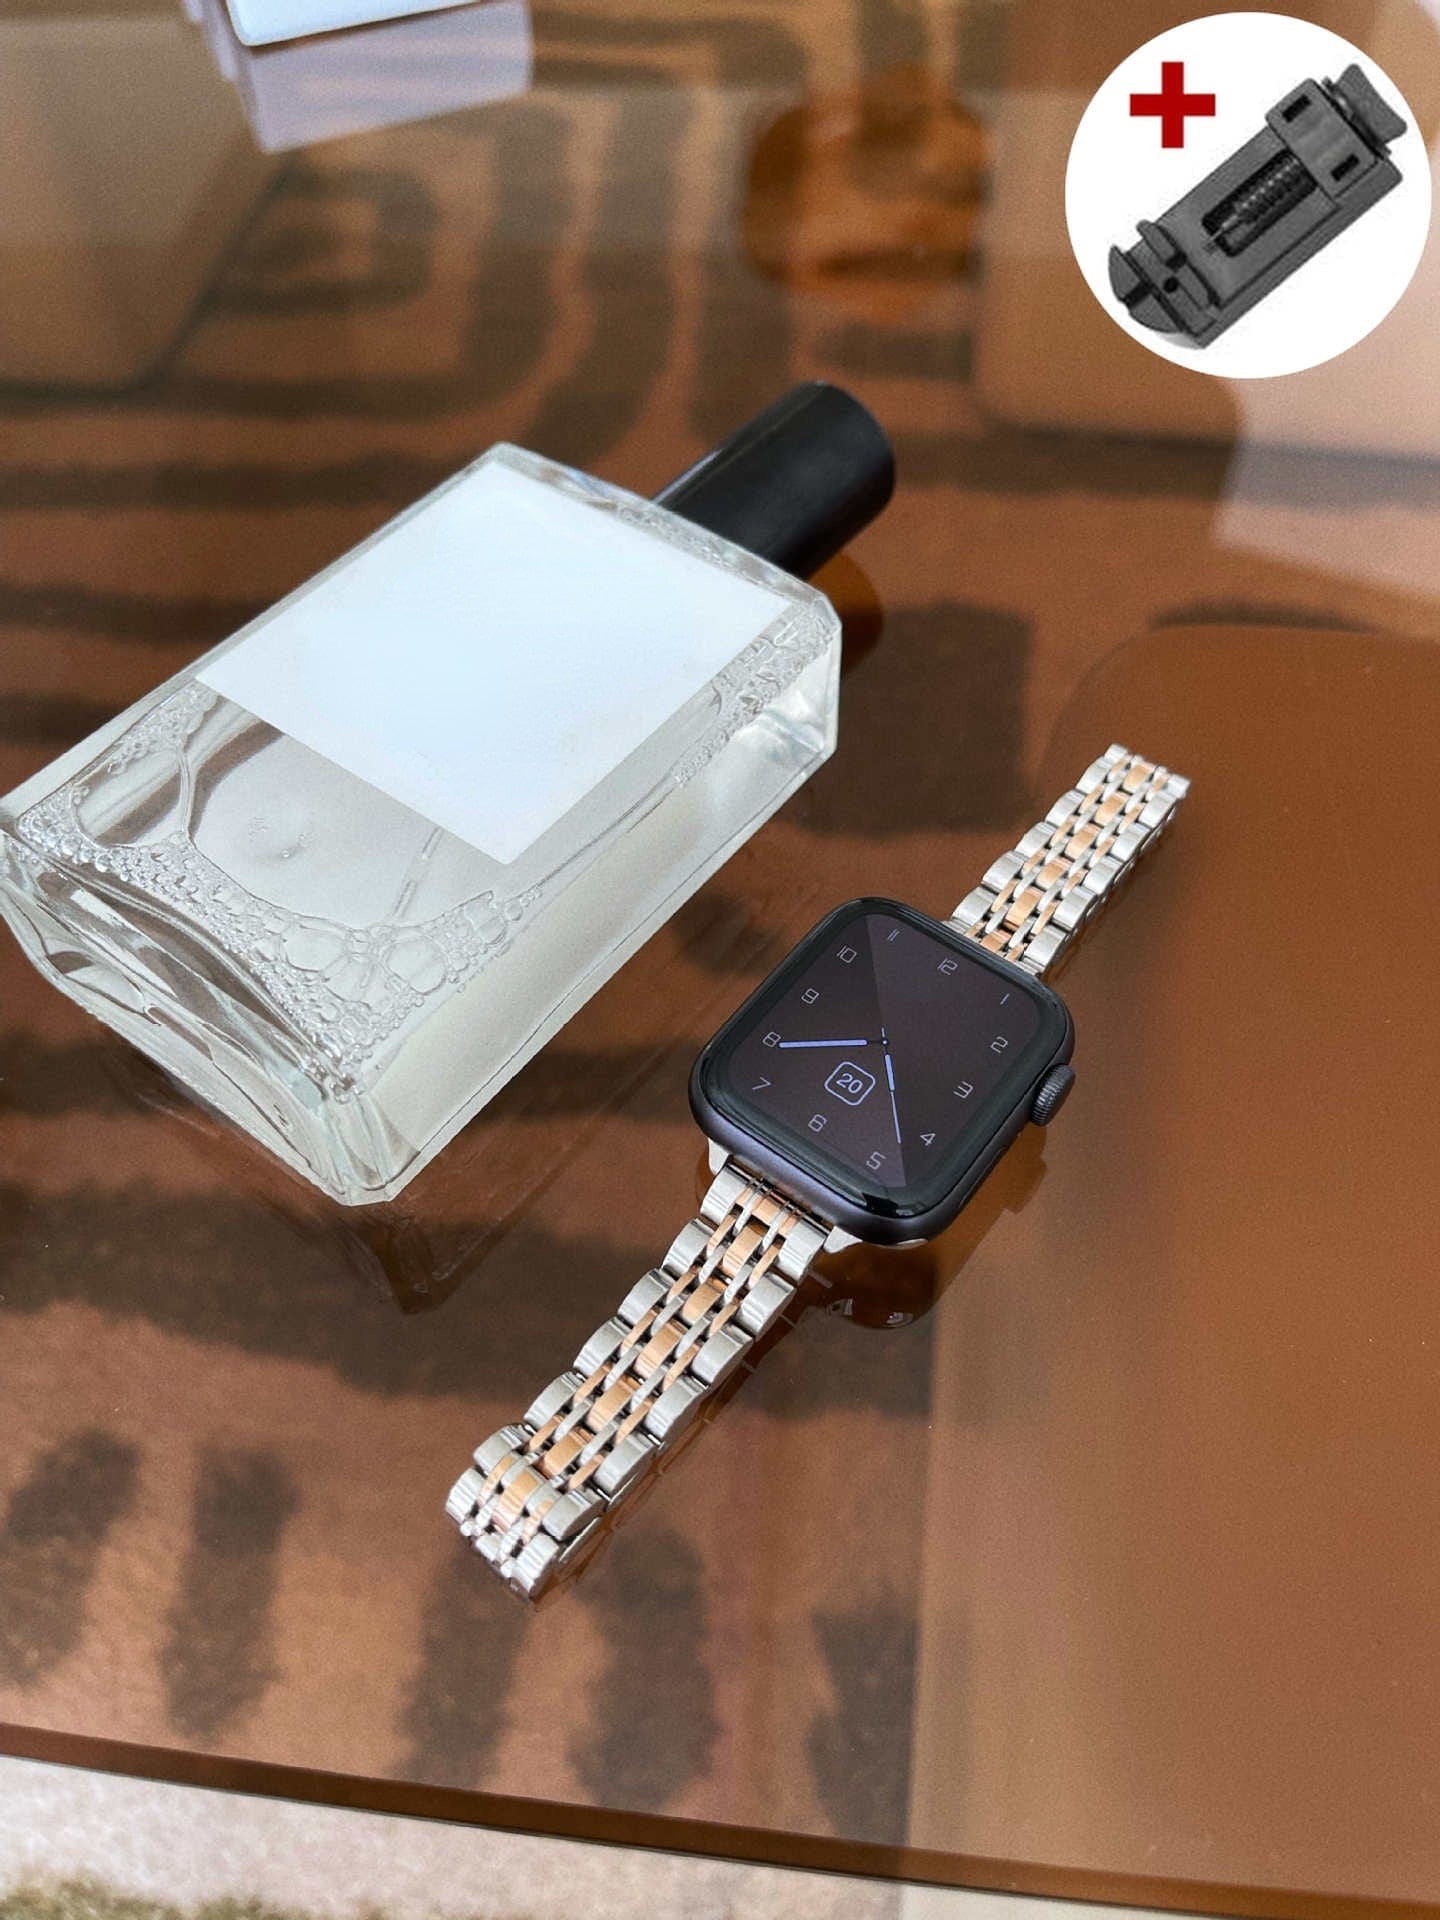 VVS Jewelry hip hop jewelry silver rosegold / 38mm Slim Stainless Steel Apple Watch Band